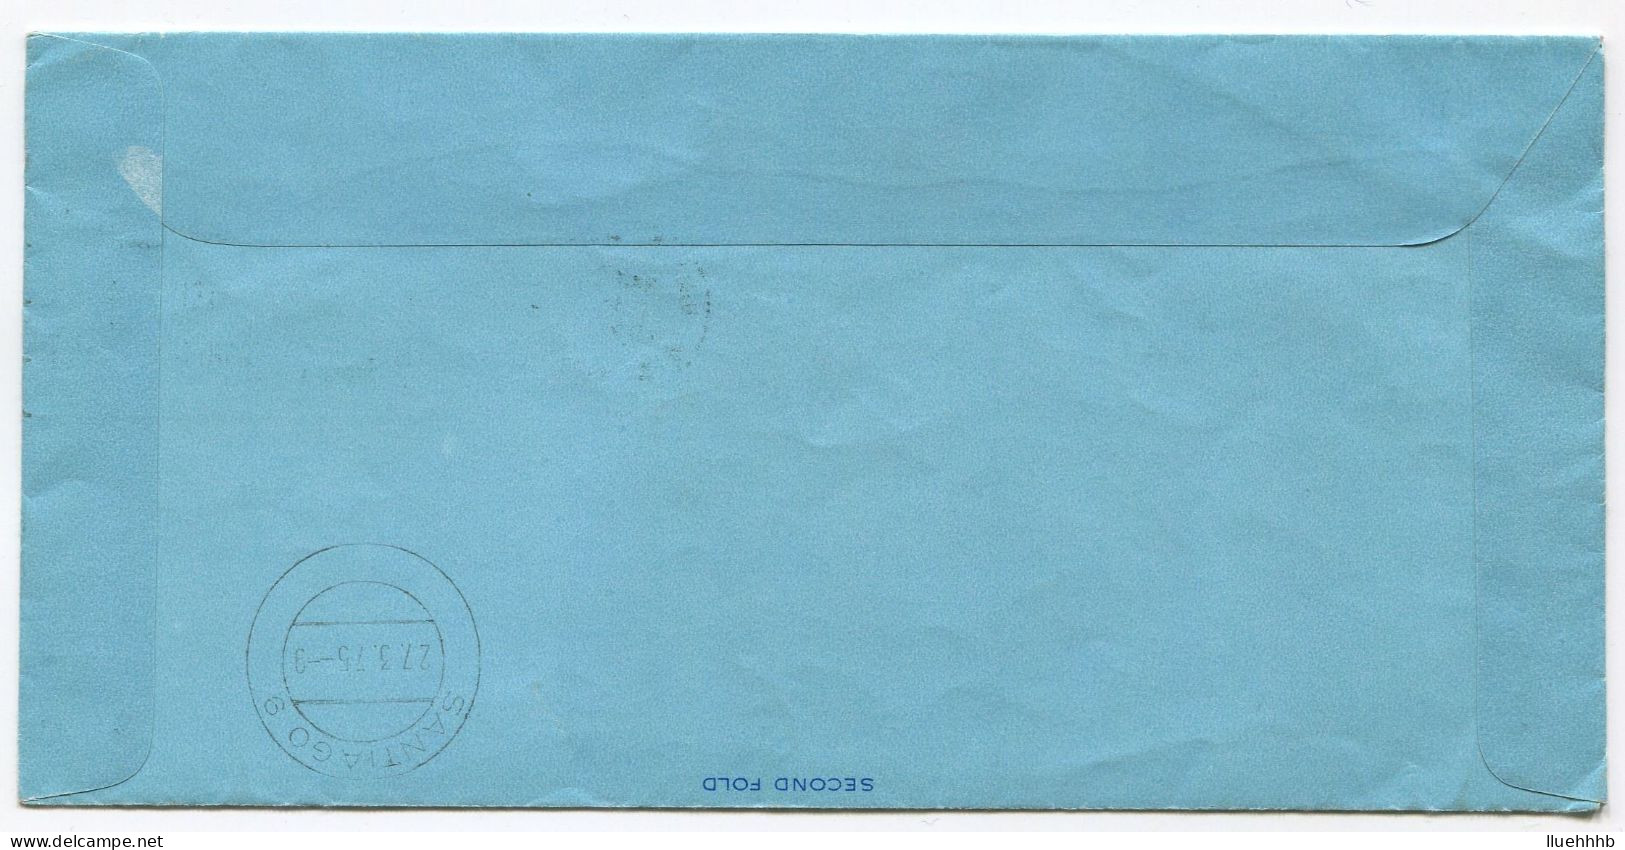 UNITED NATIONS: 1975 UC12 18c Aerogramme Sent To CHILE - Airmail